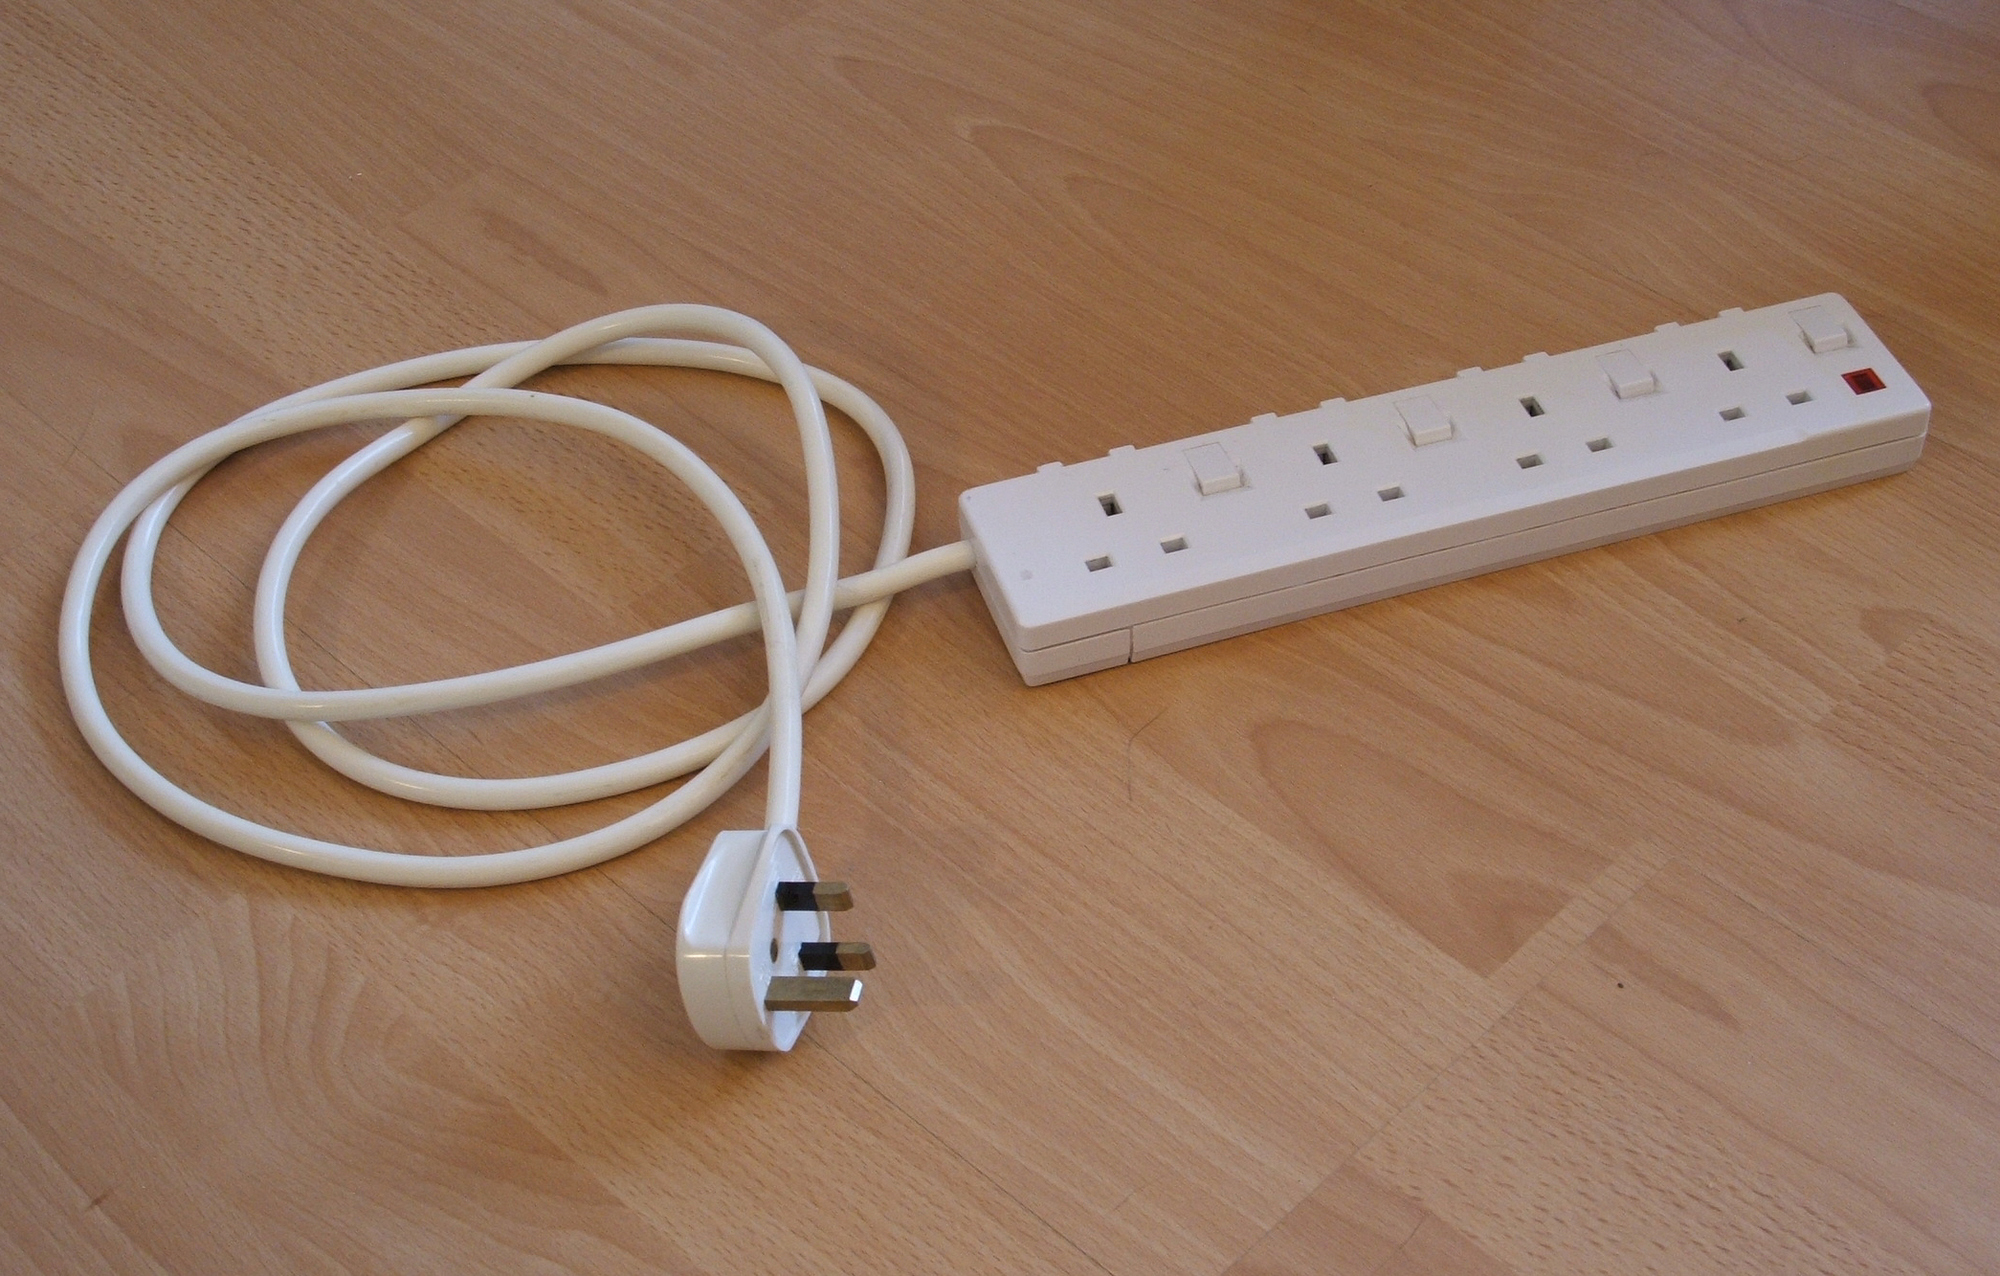 Safety tips for using an extension cord